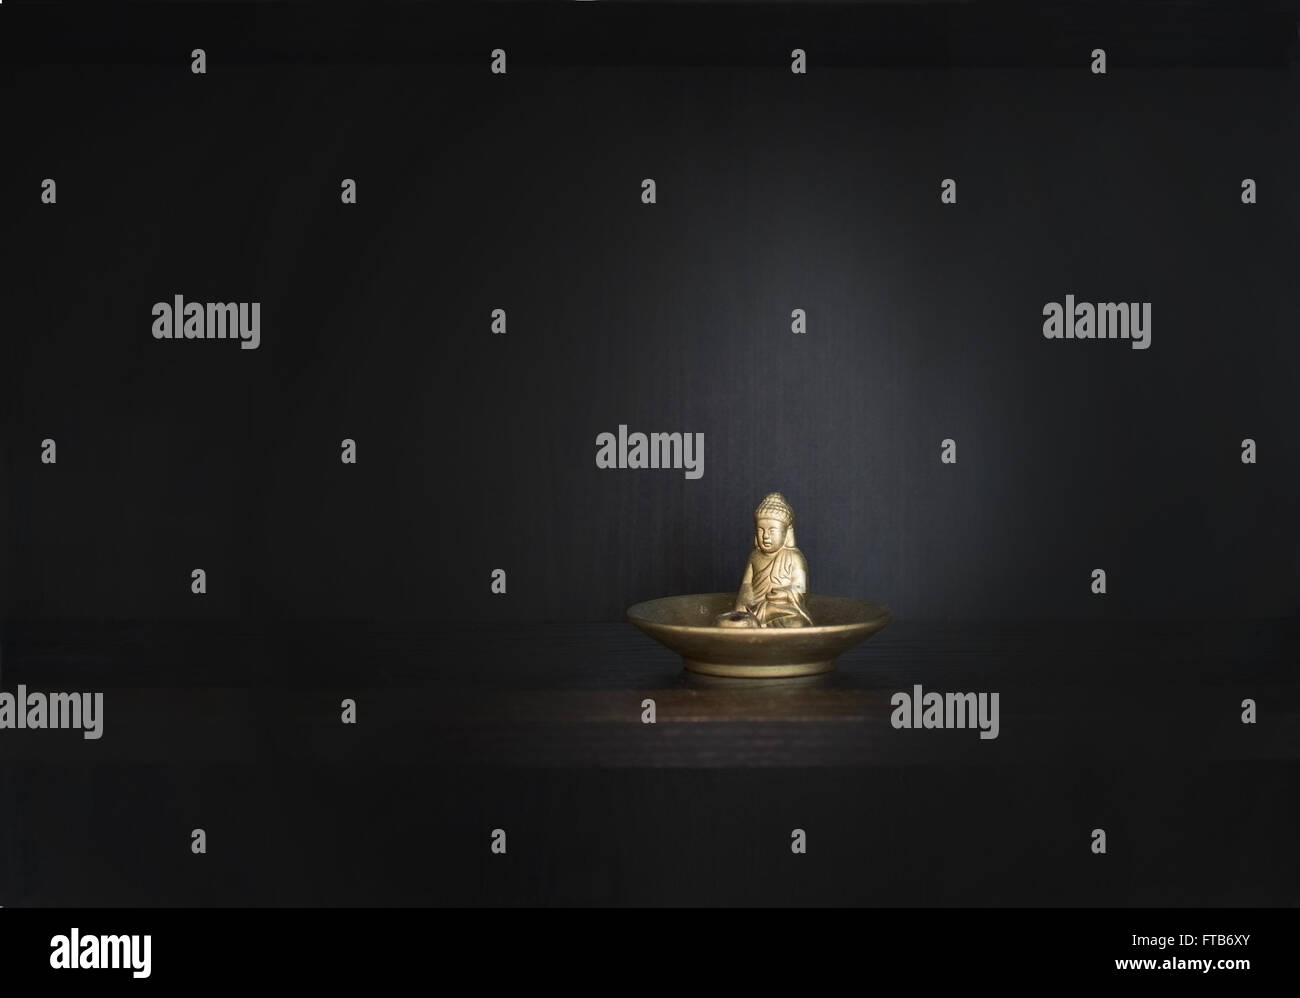 Gold metal Buddha on dark background with copy space, chiaroscuro style. Stock Photo